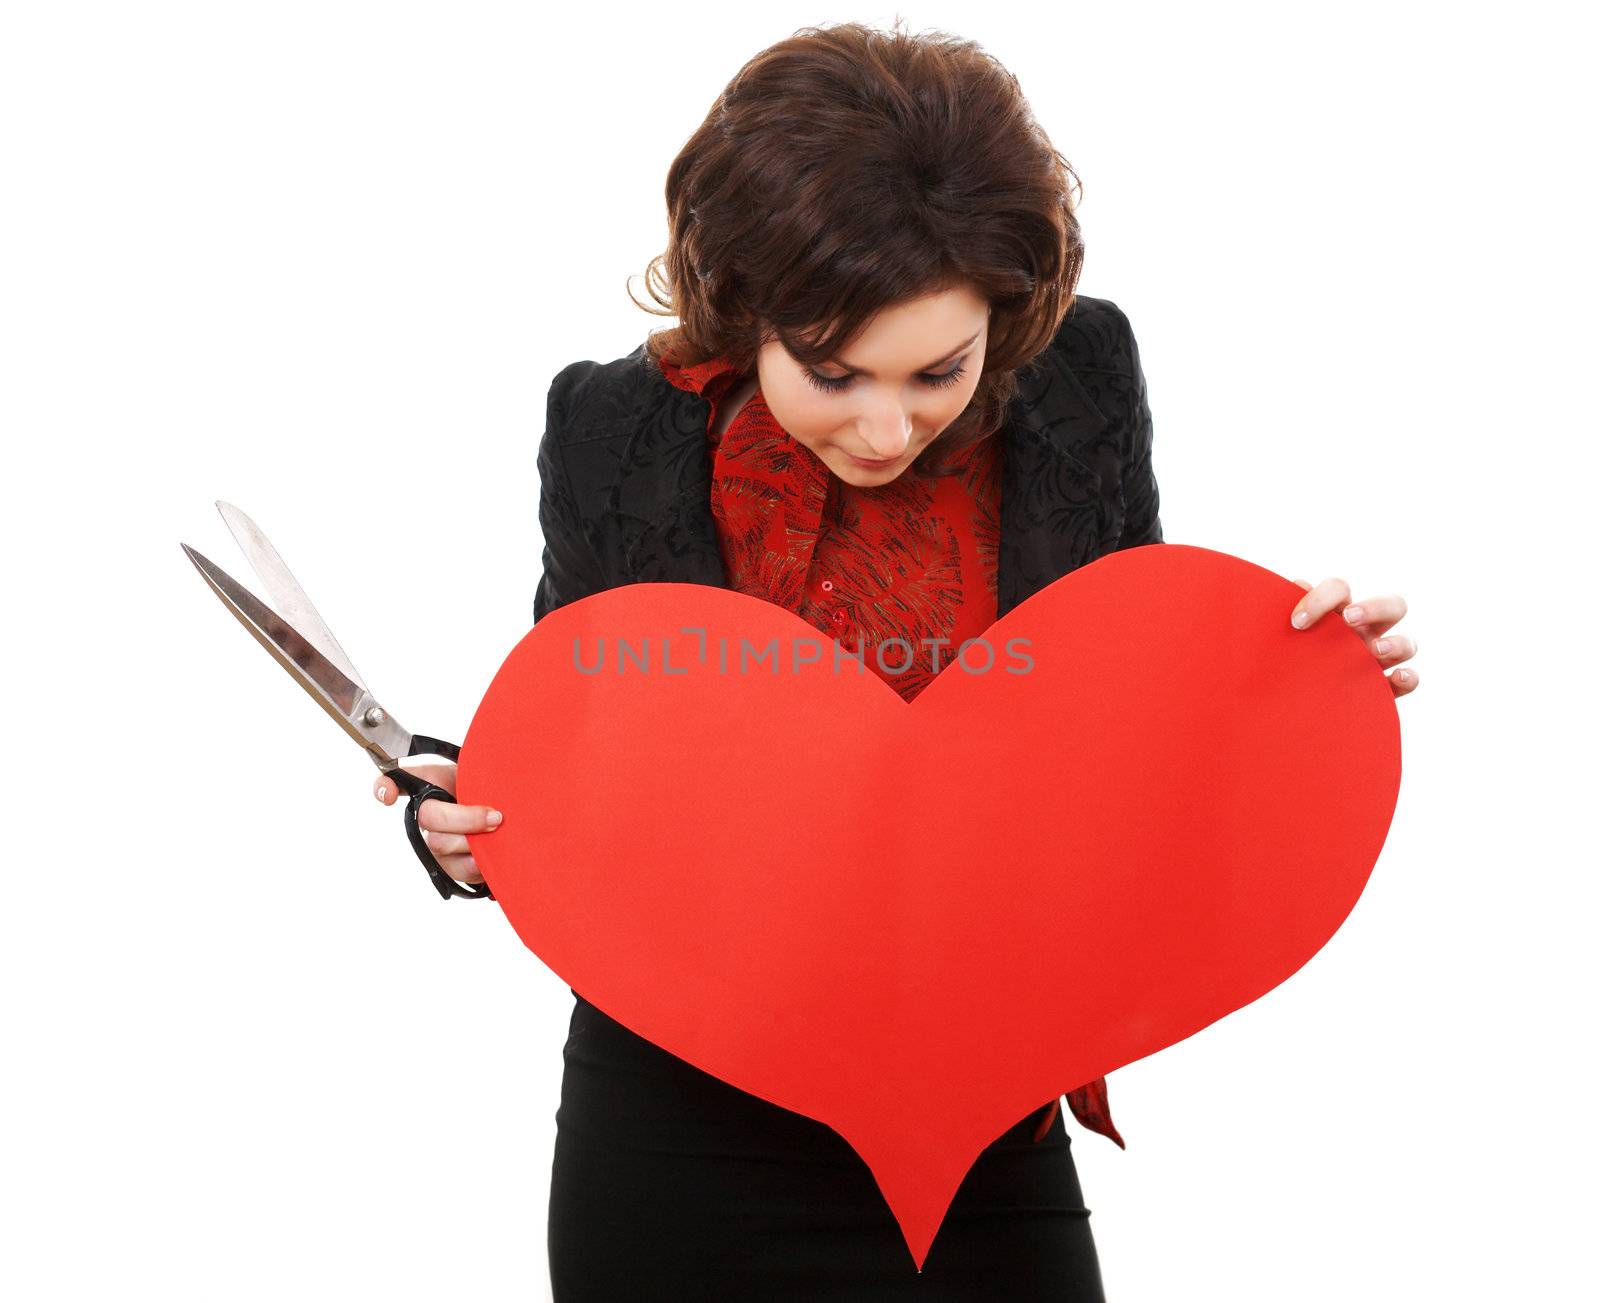 Girl with scissors looking onto a paper heart